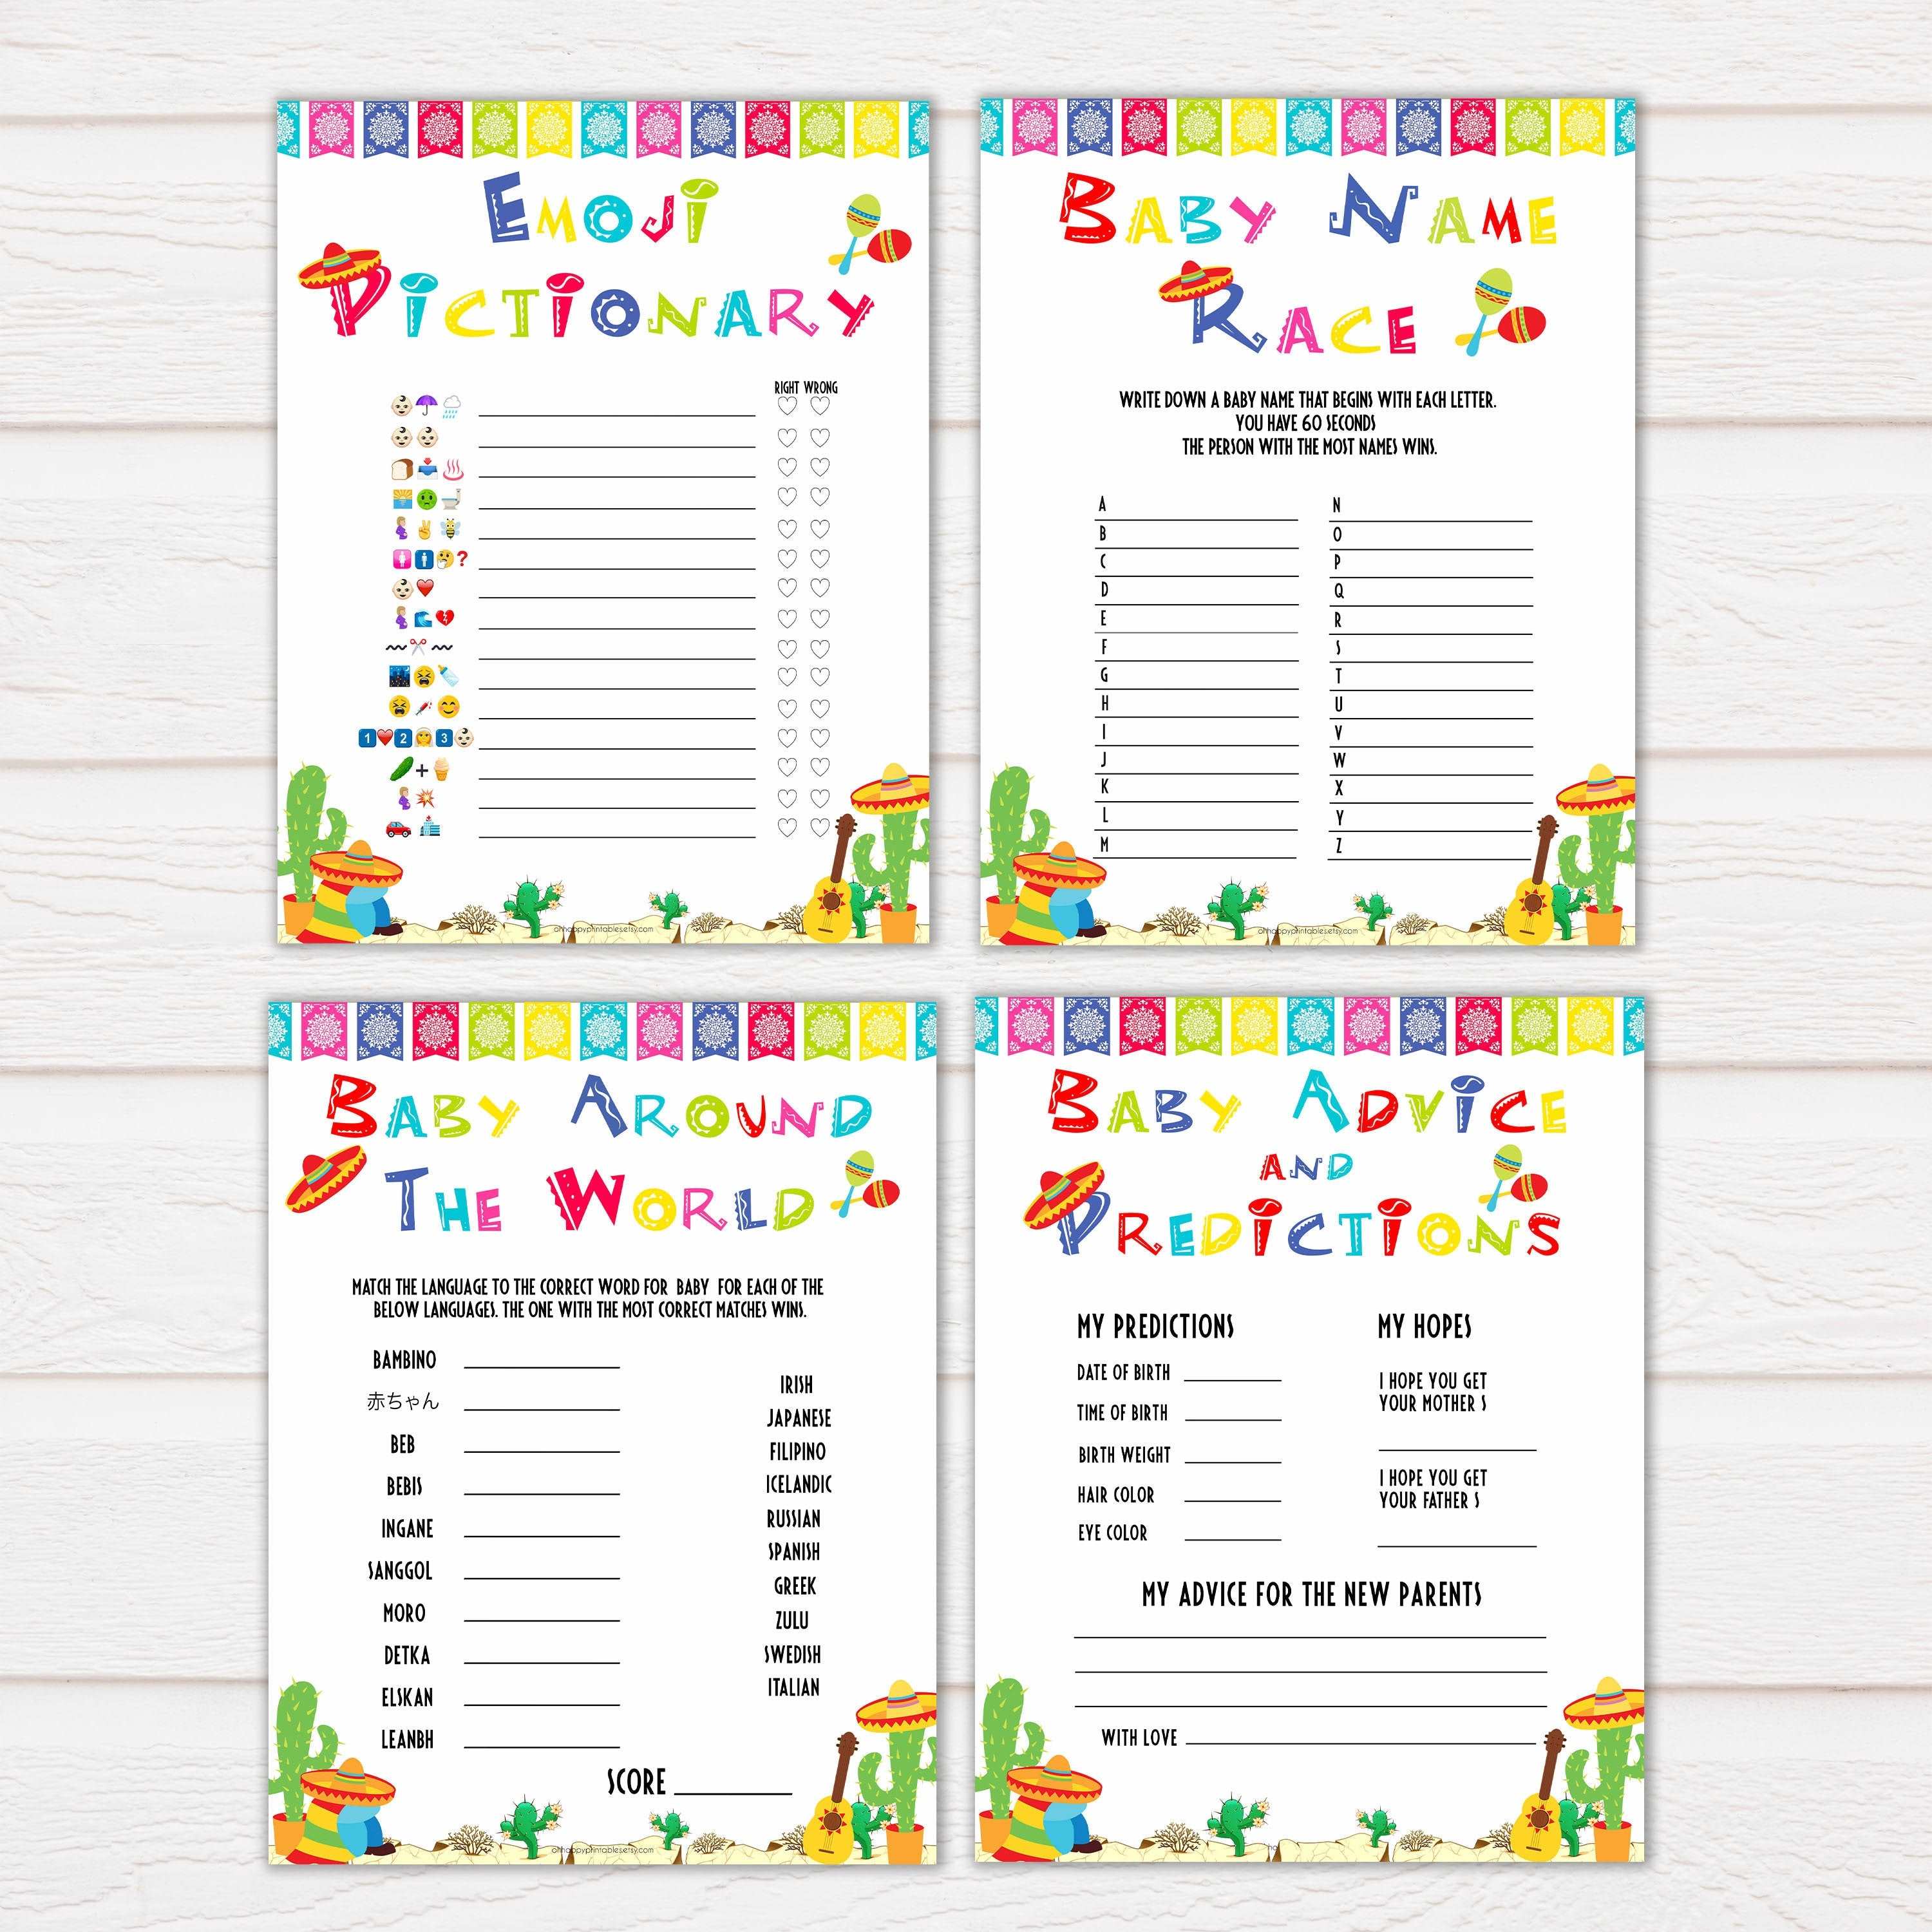 fiesta baby shower, mexican baby games, baby shower games bundle, Printable baby shower games, Mexican fiesta fun baby games, baby shower games, fun baby shower ideas, top baby shower ideas, fiesta shower baby shower, fiesta baby shower ideas